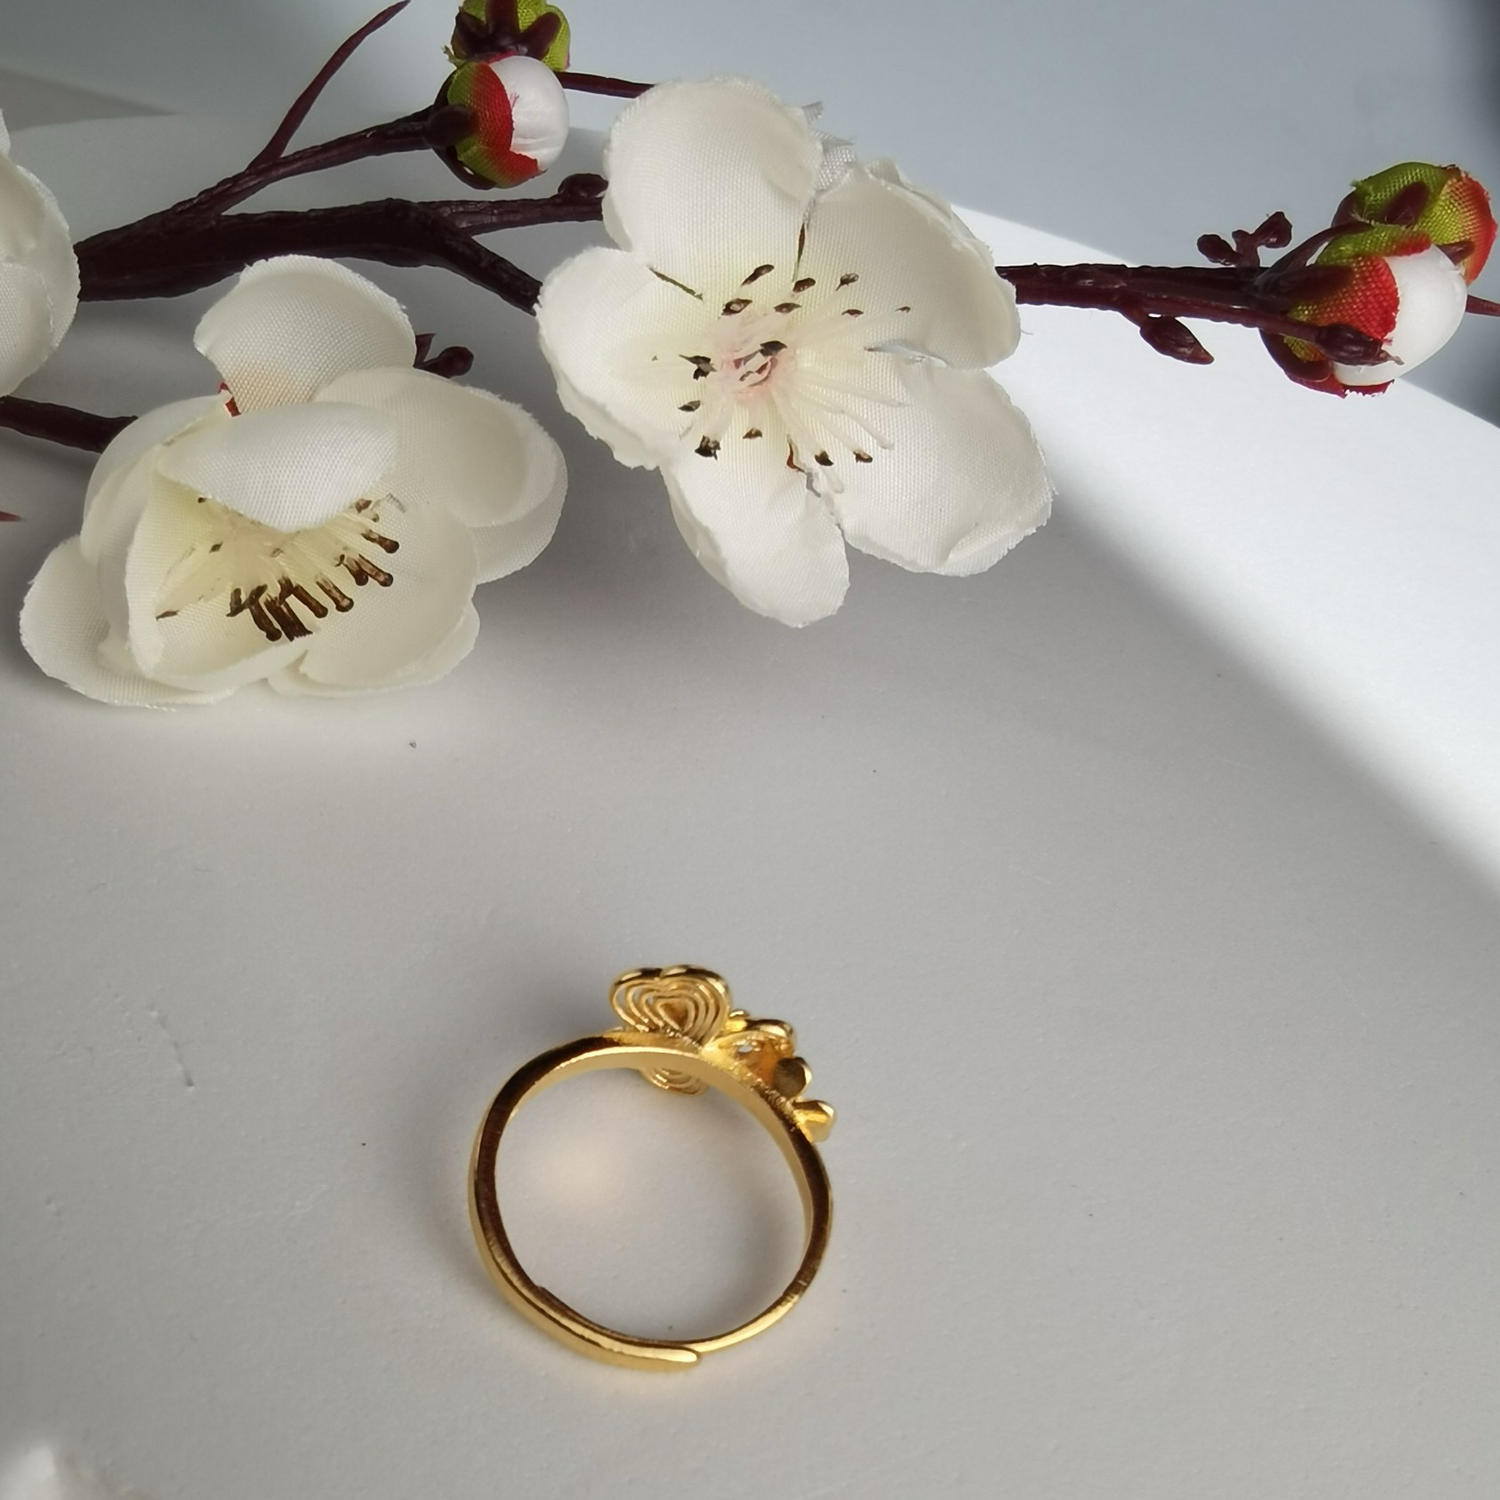 Alluvial Gold Vacuum Electroplating 24K Gold Clover Flower Loose Ring